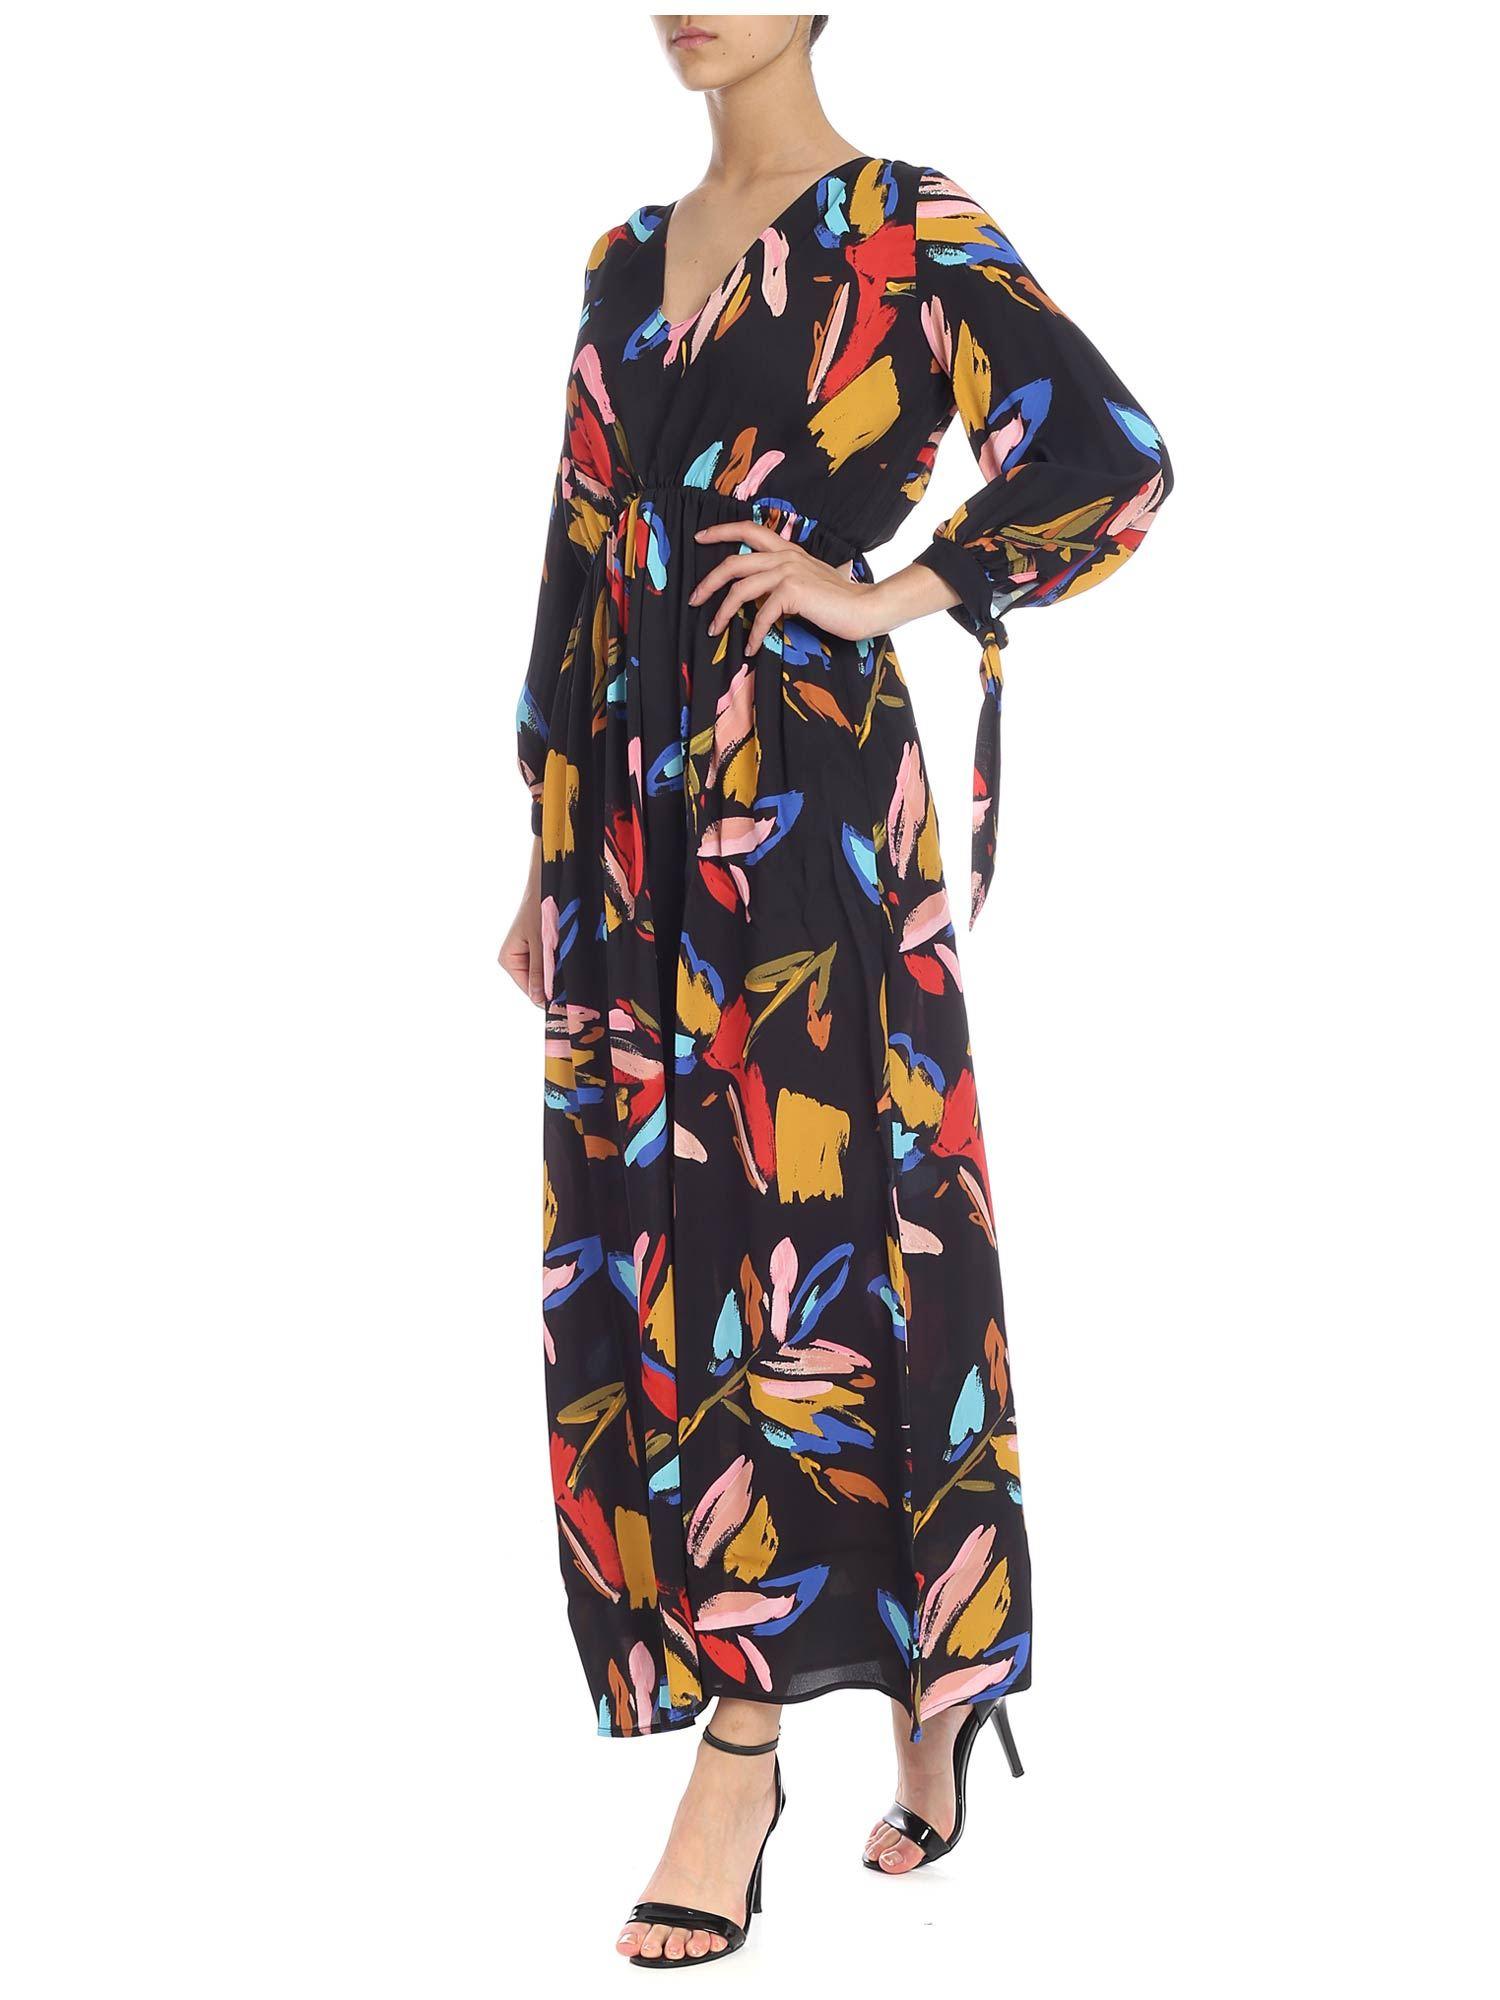 Ottod'Ame Dress In Black With Multicolored Pattern in Black - Lyst